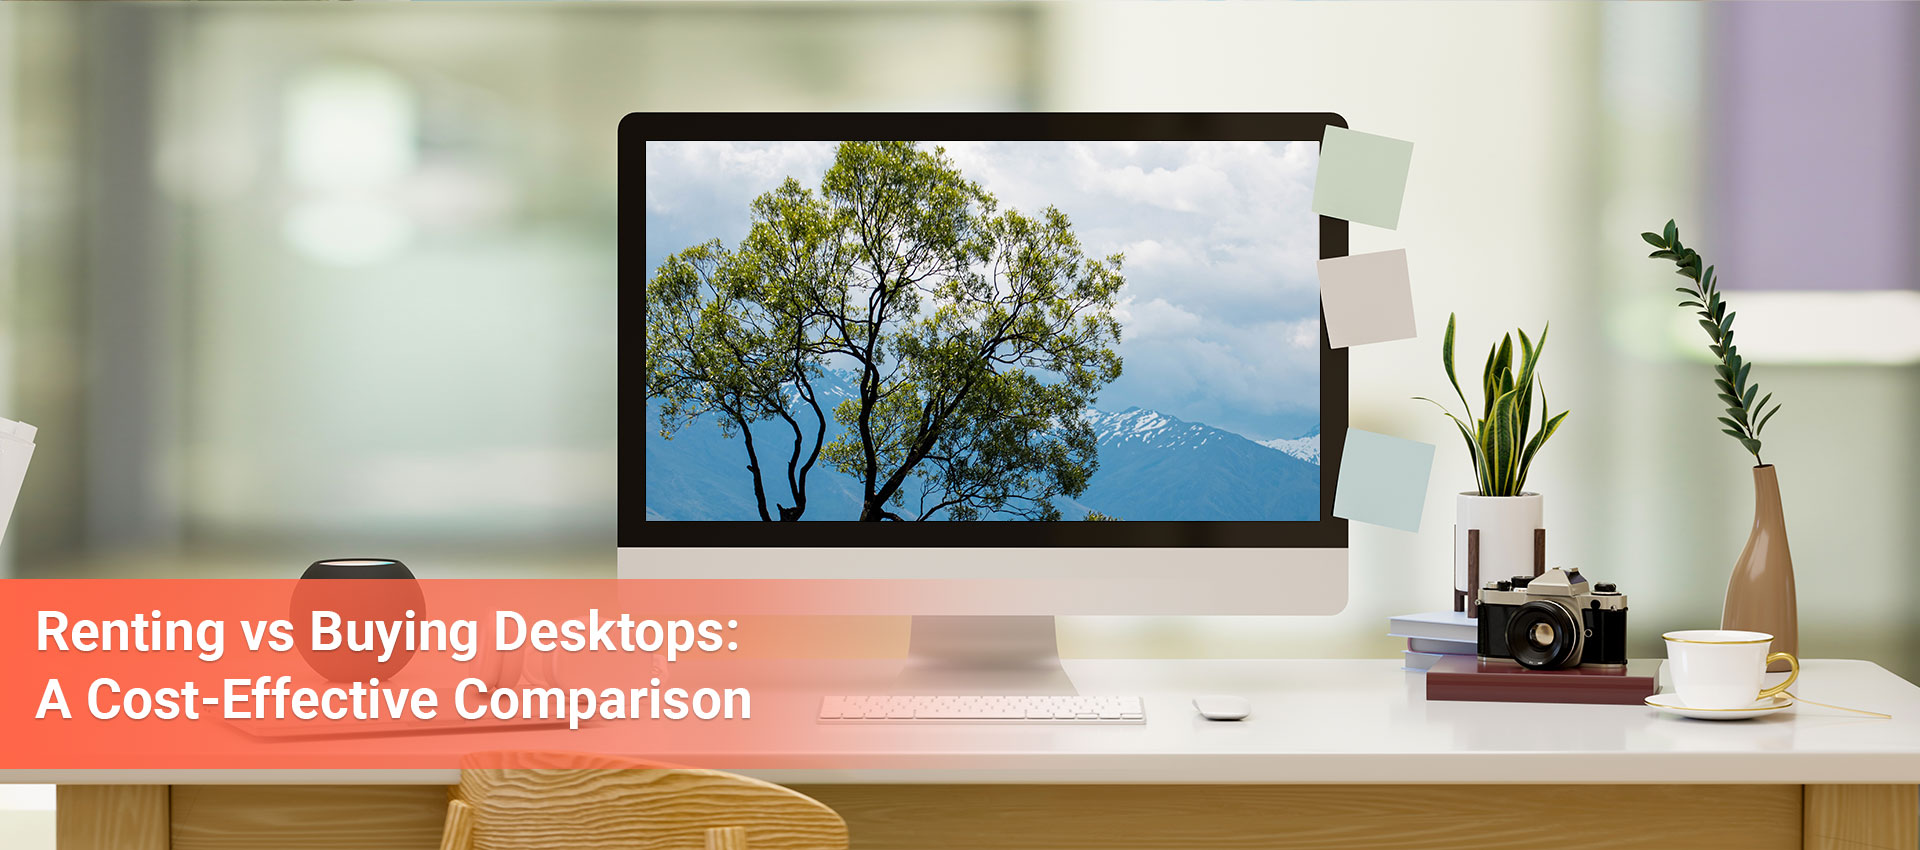 featured image for our blog- Renting vs. Buying Desktops: A Cost-Effective Comparison